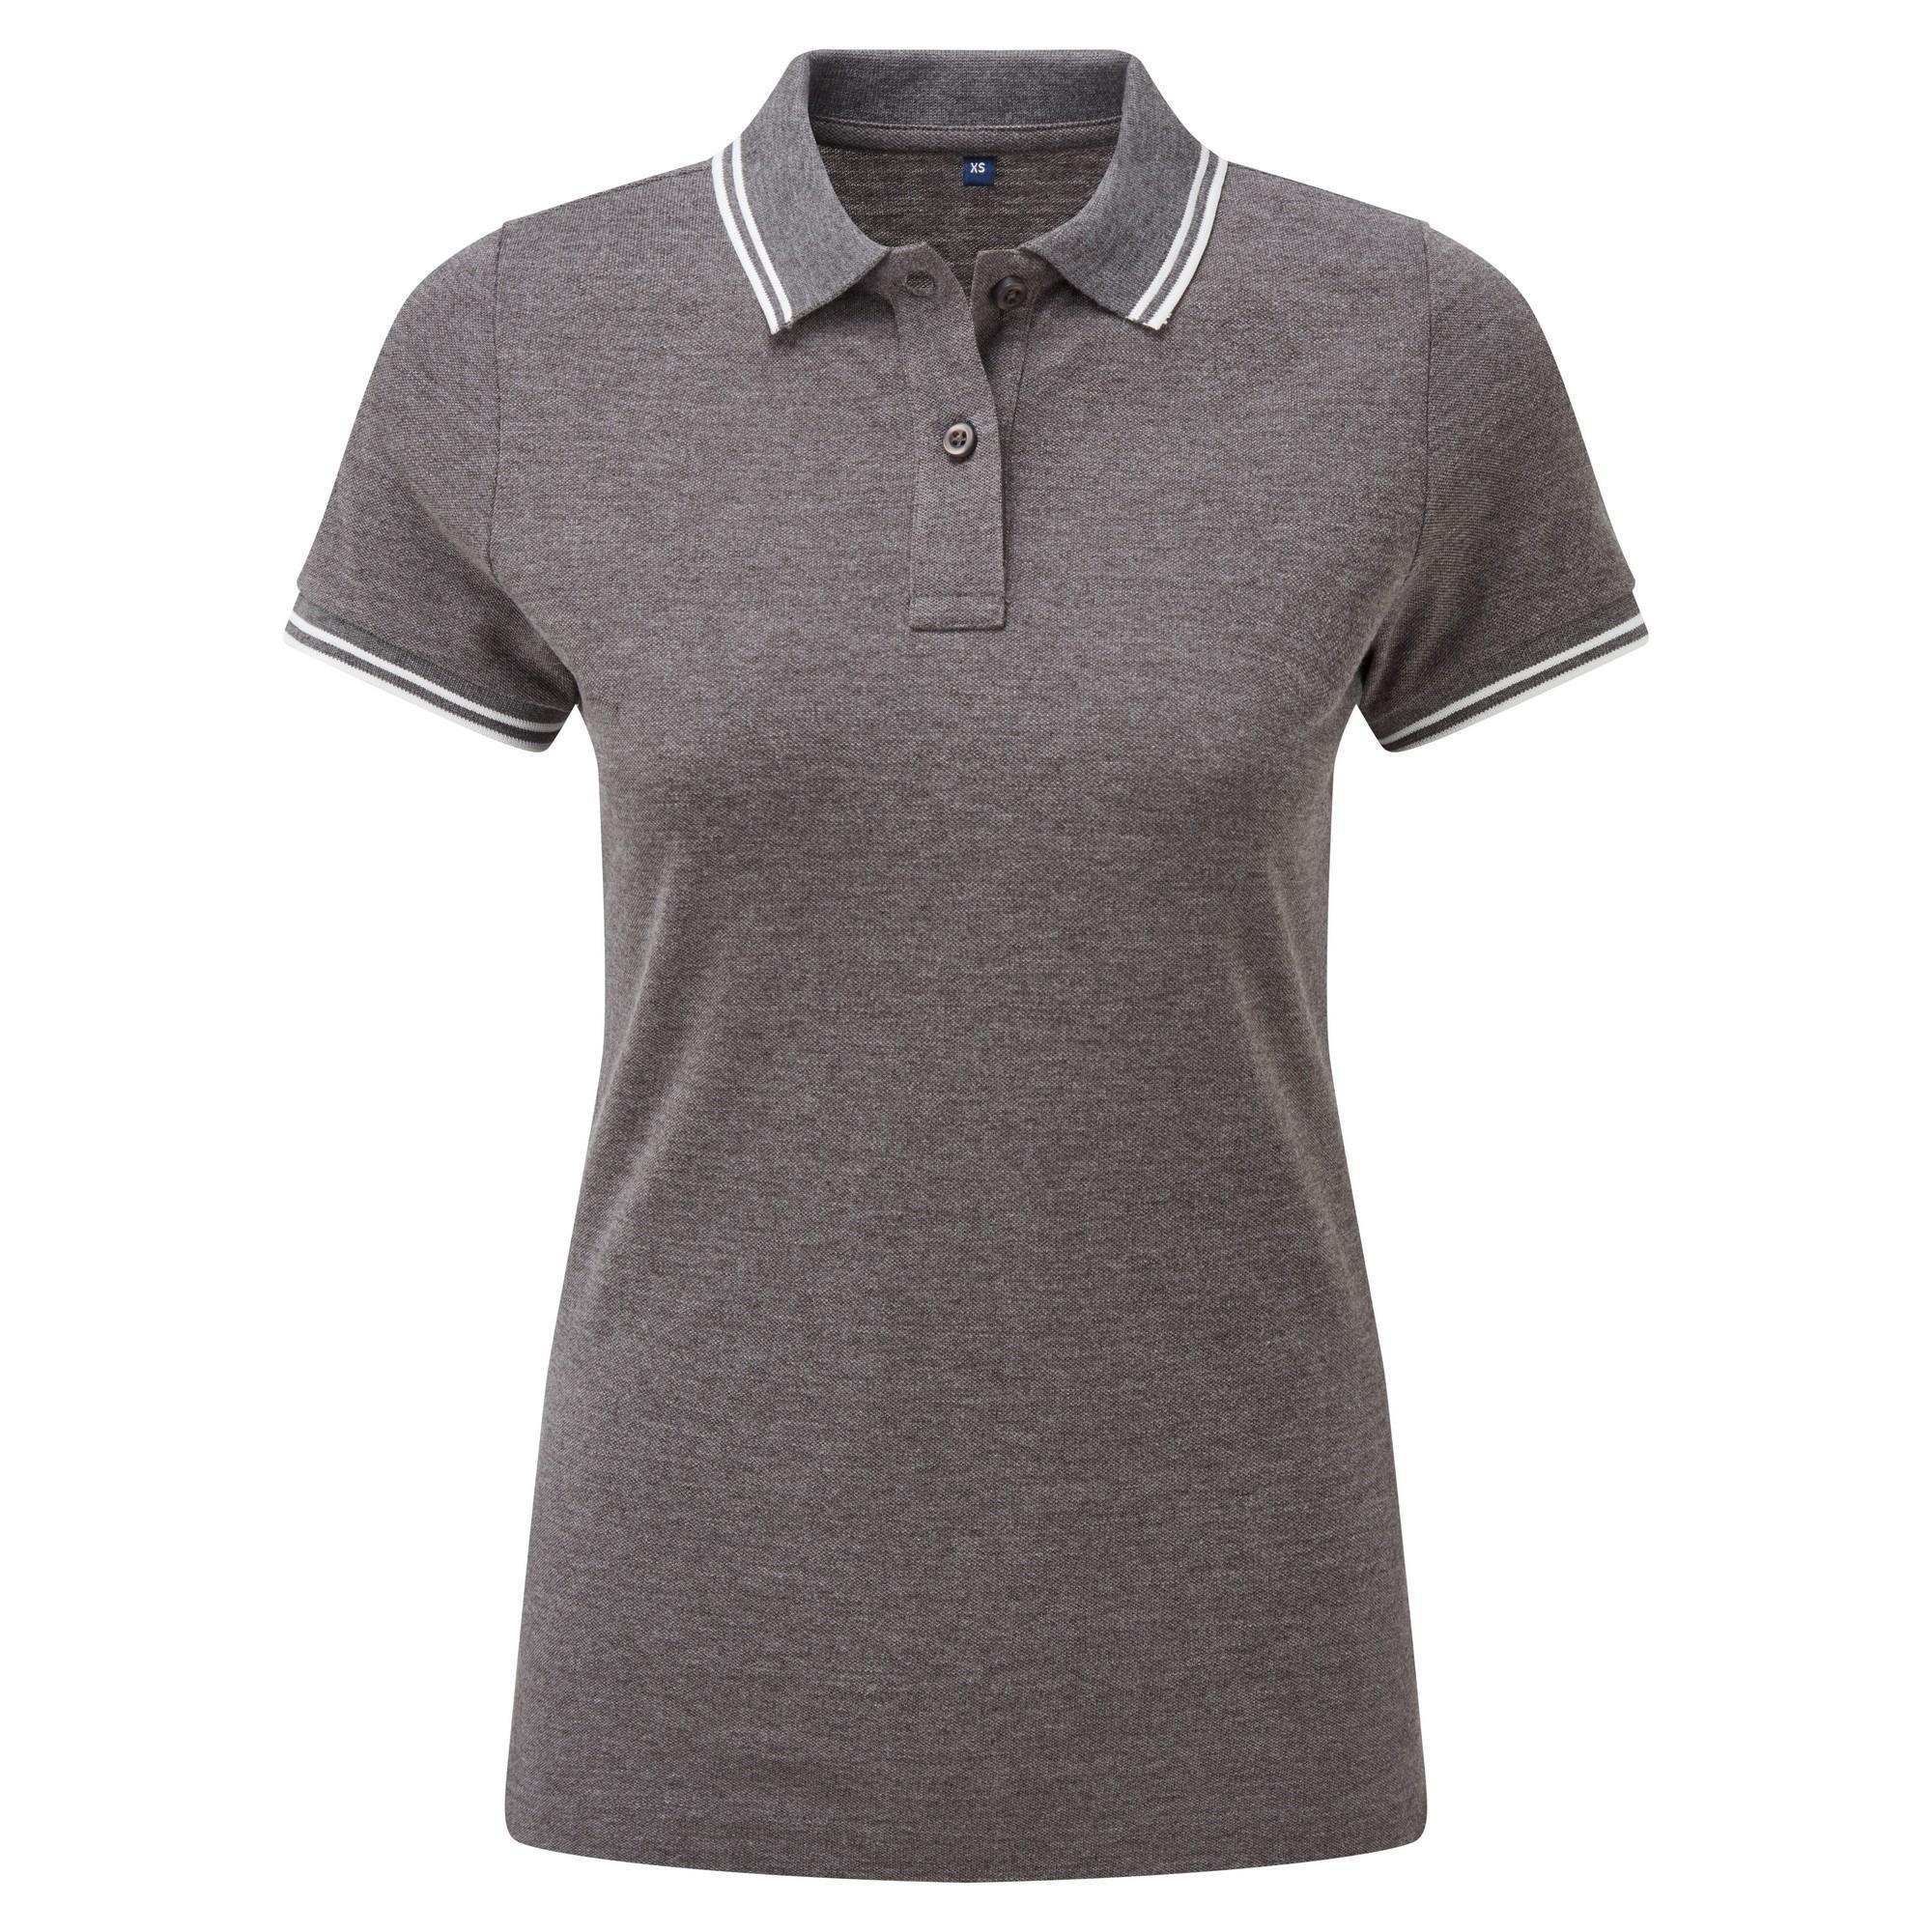 Asquith & Fox Womens/Ladies Classic Fit Tipped Polo (Charcoal/White) (XXL)